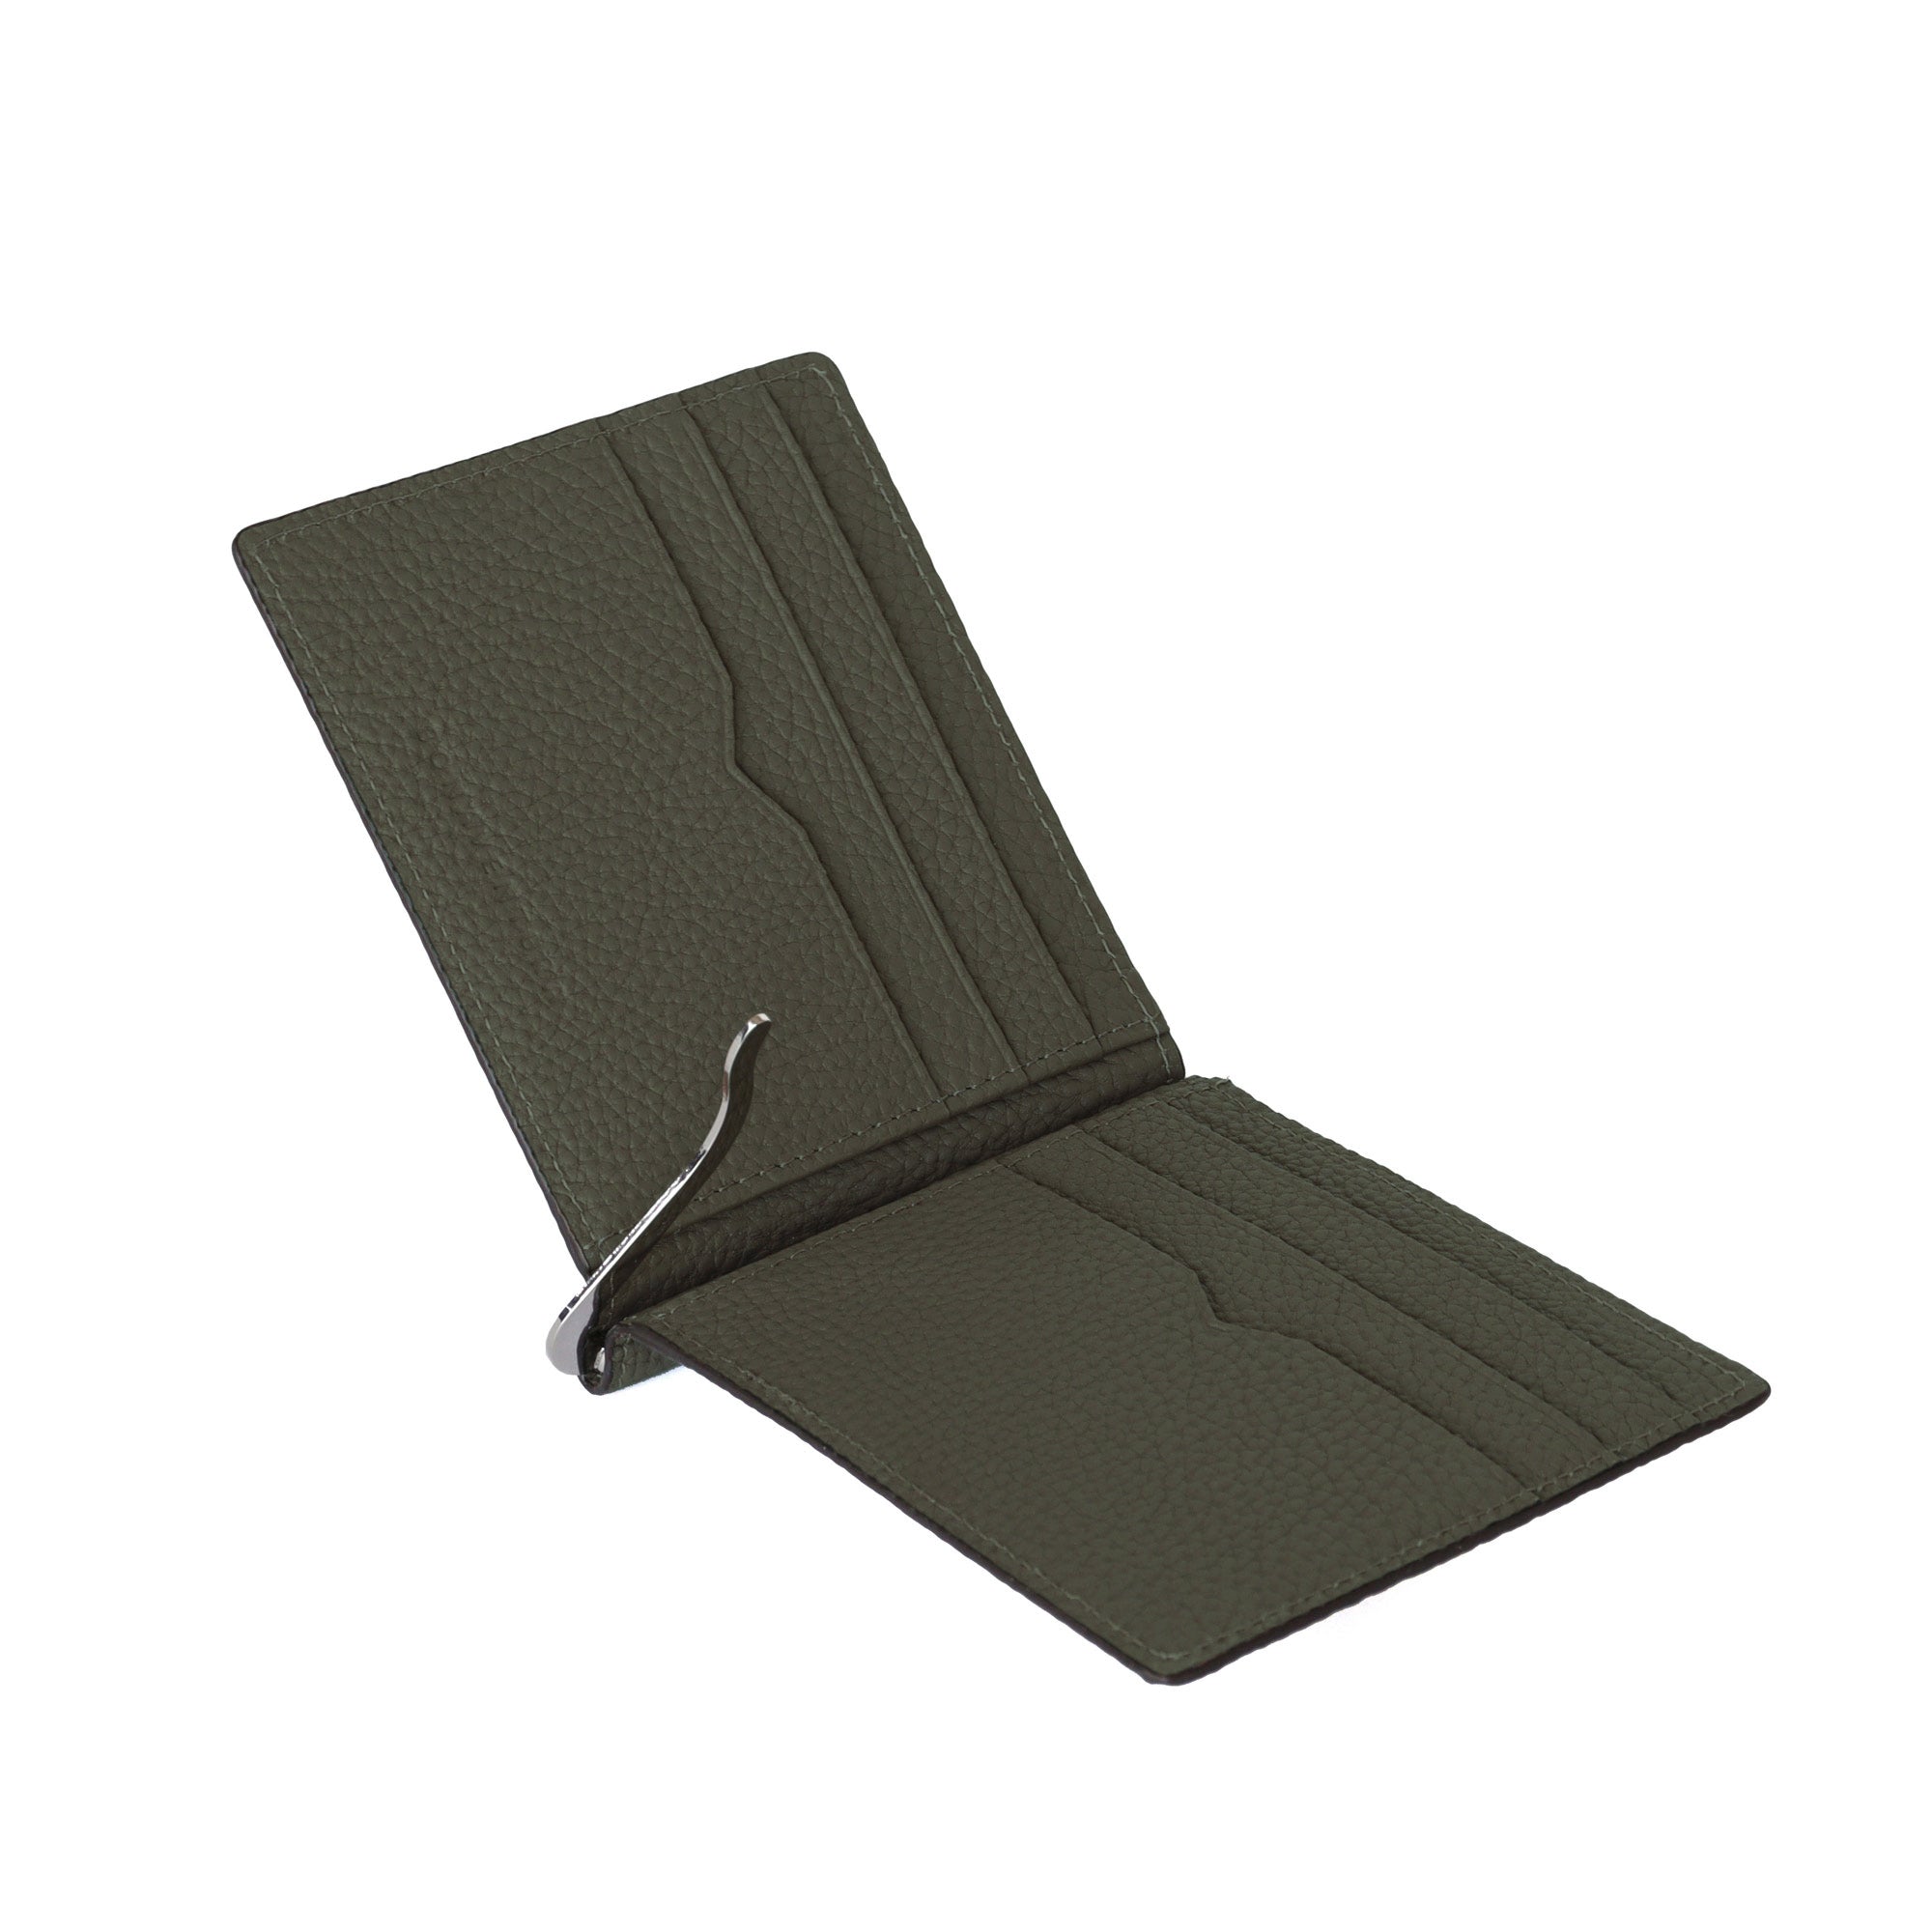 Bifold Bill Clip with Coin Case in Shrink Leather